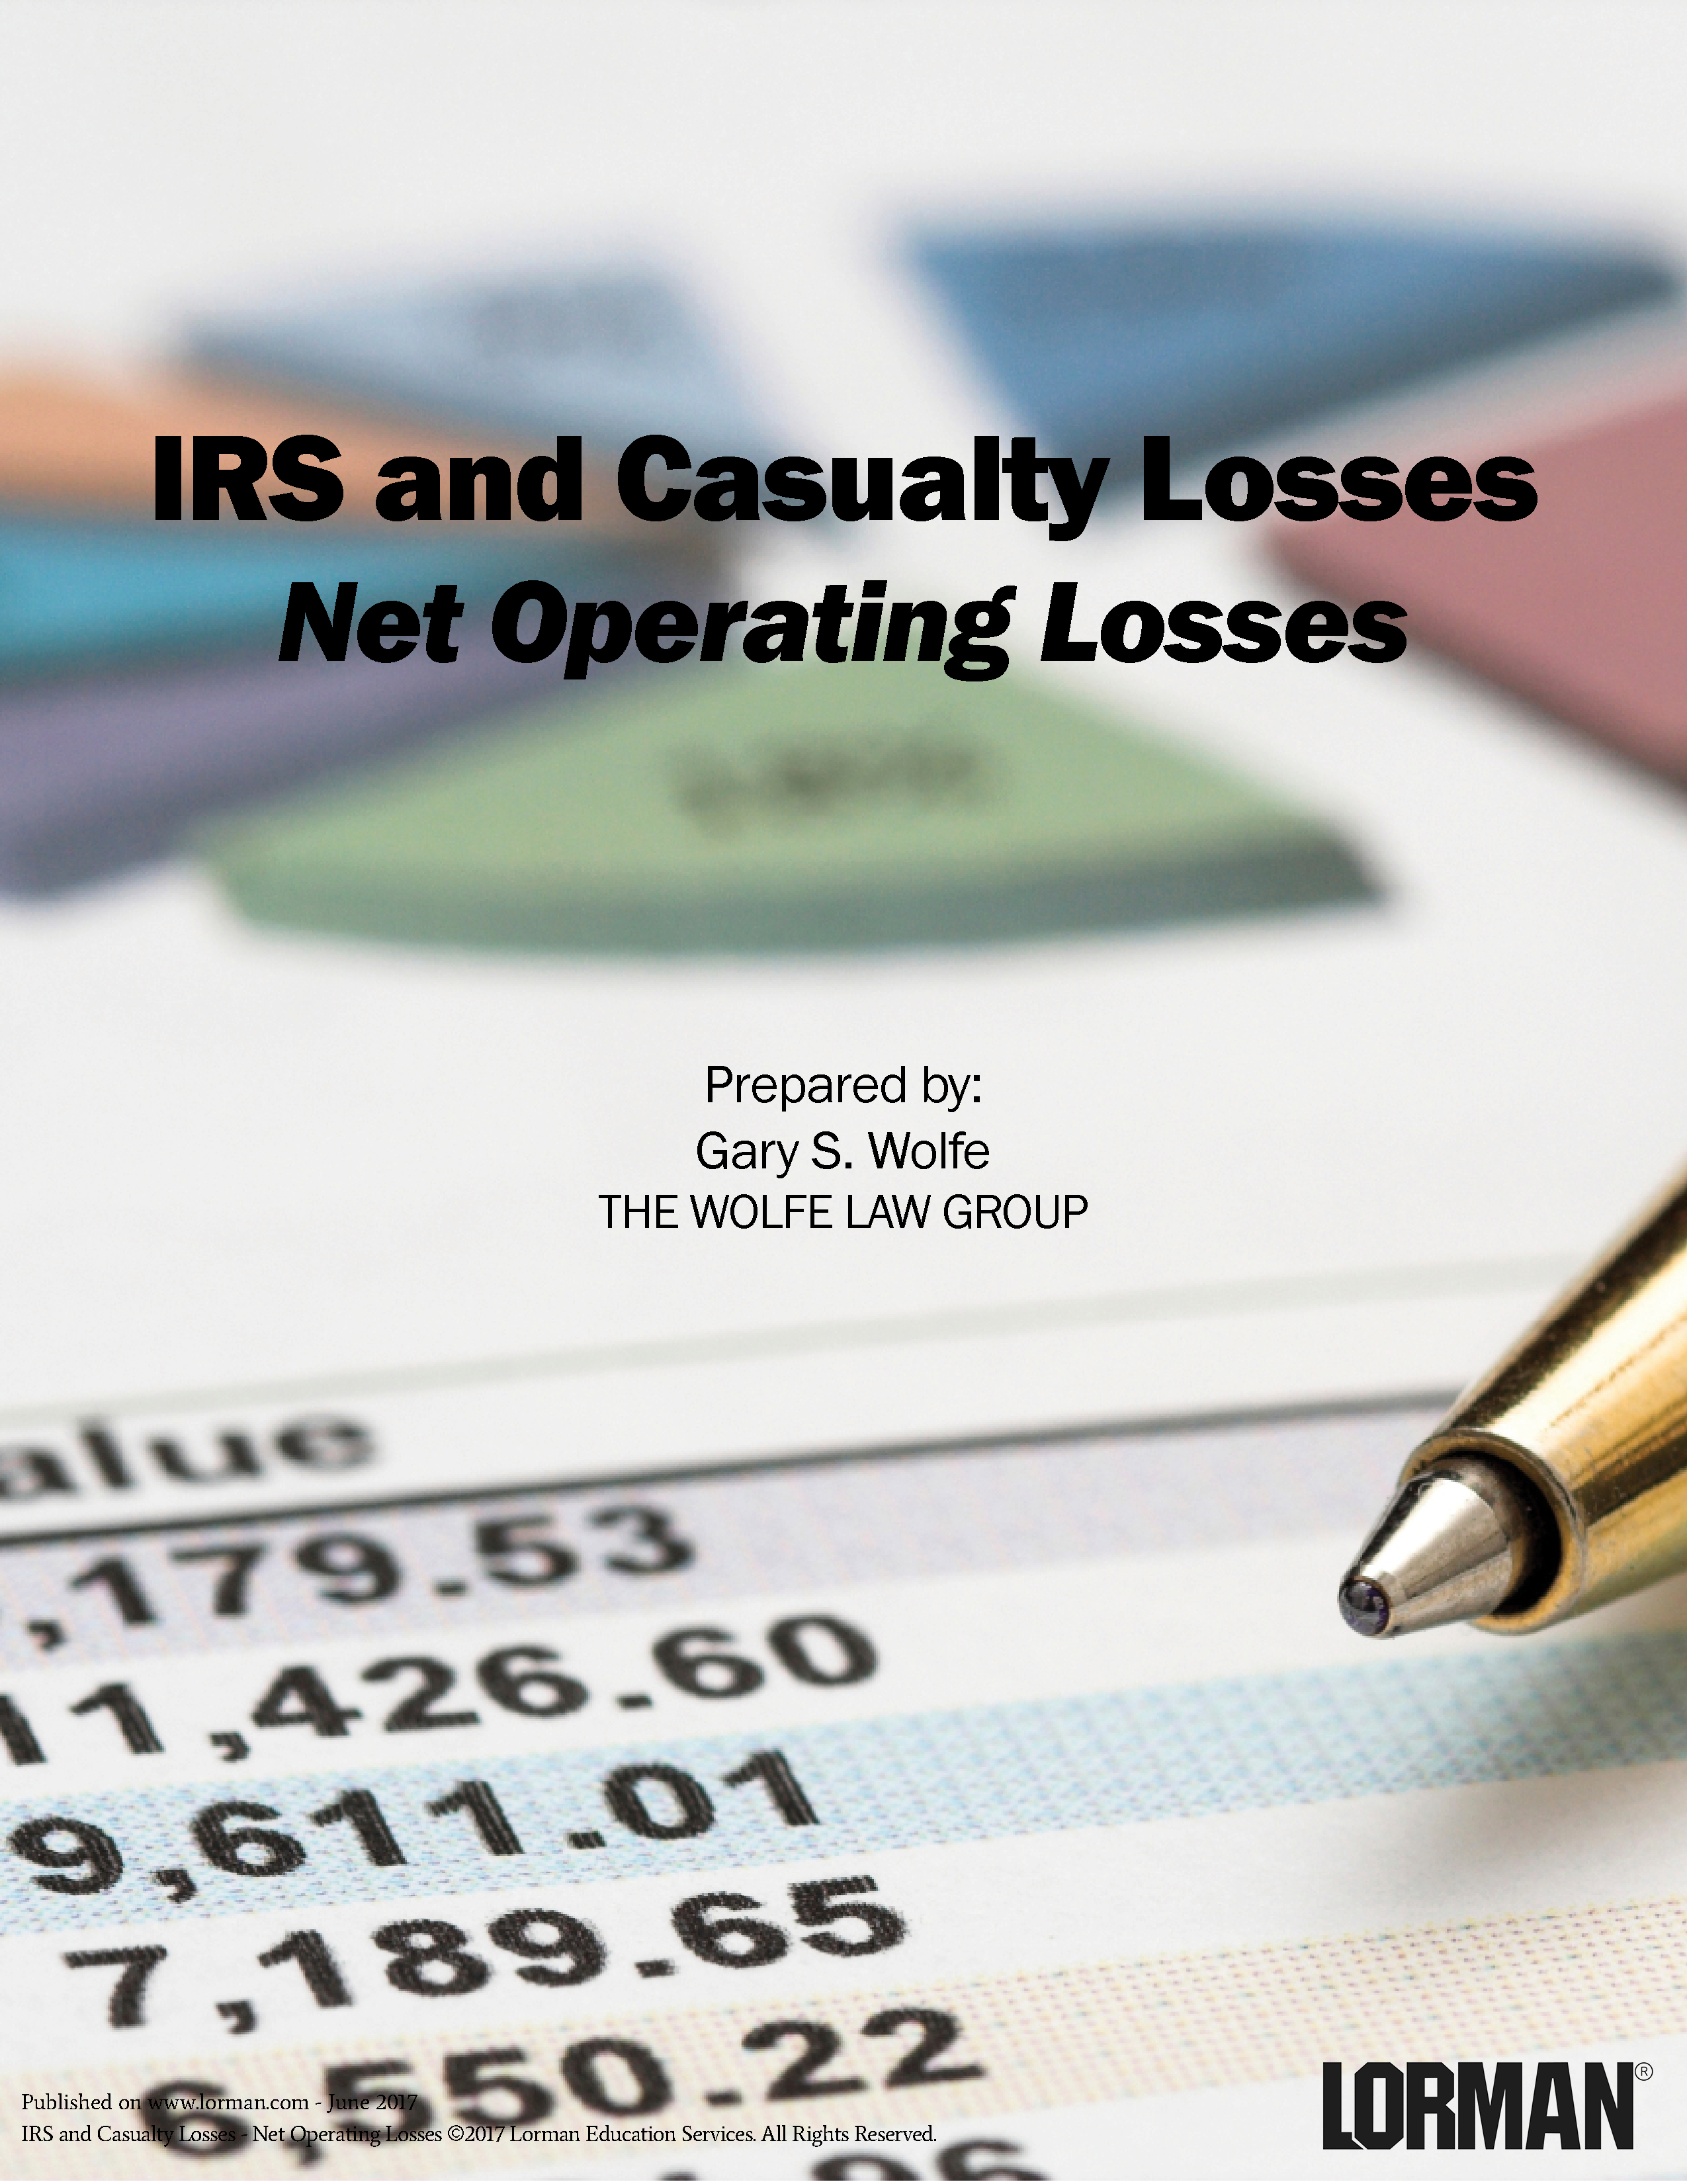 IRS and Casualty Losses - Net Operating Losses